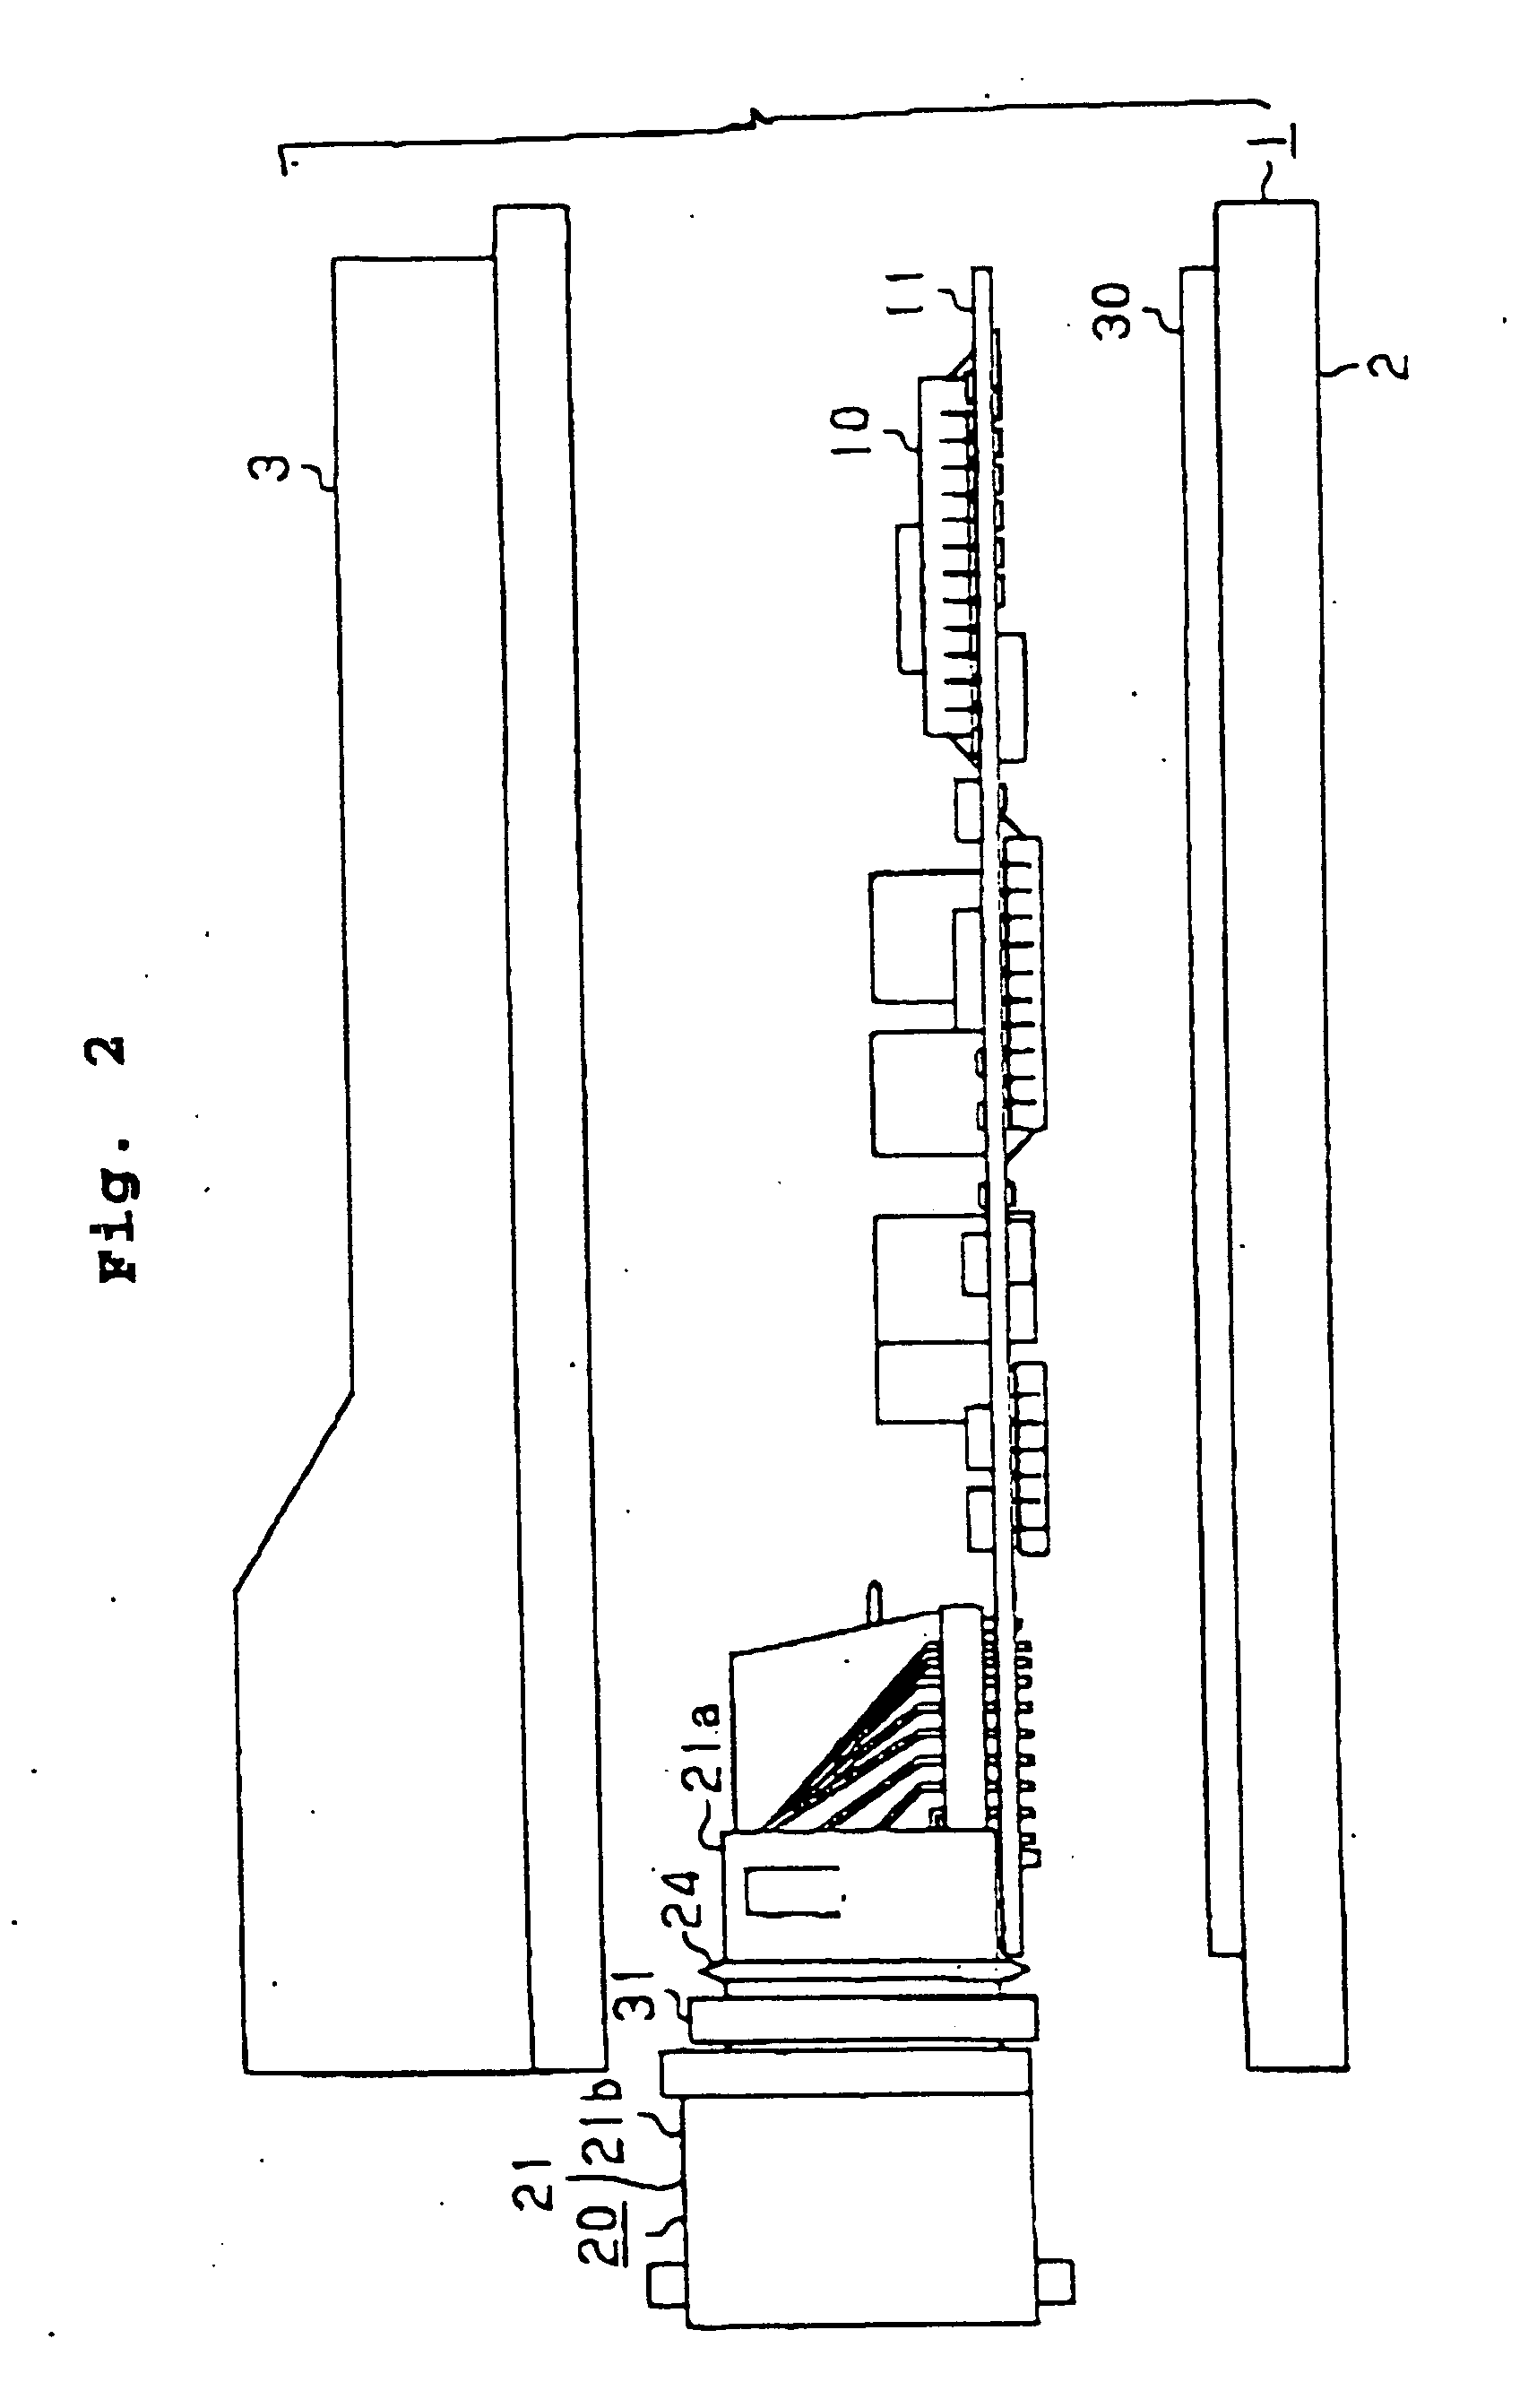 Water-resistant casing structure for electronic control device